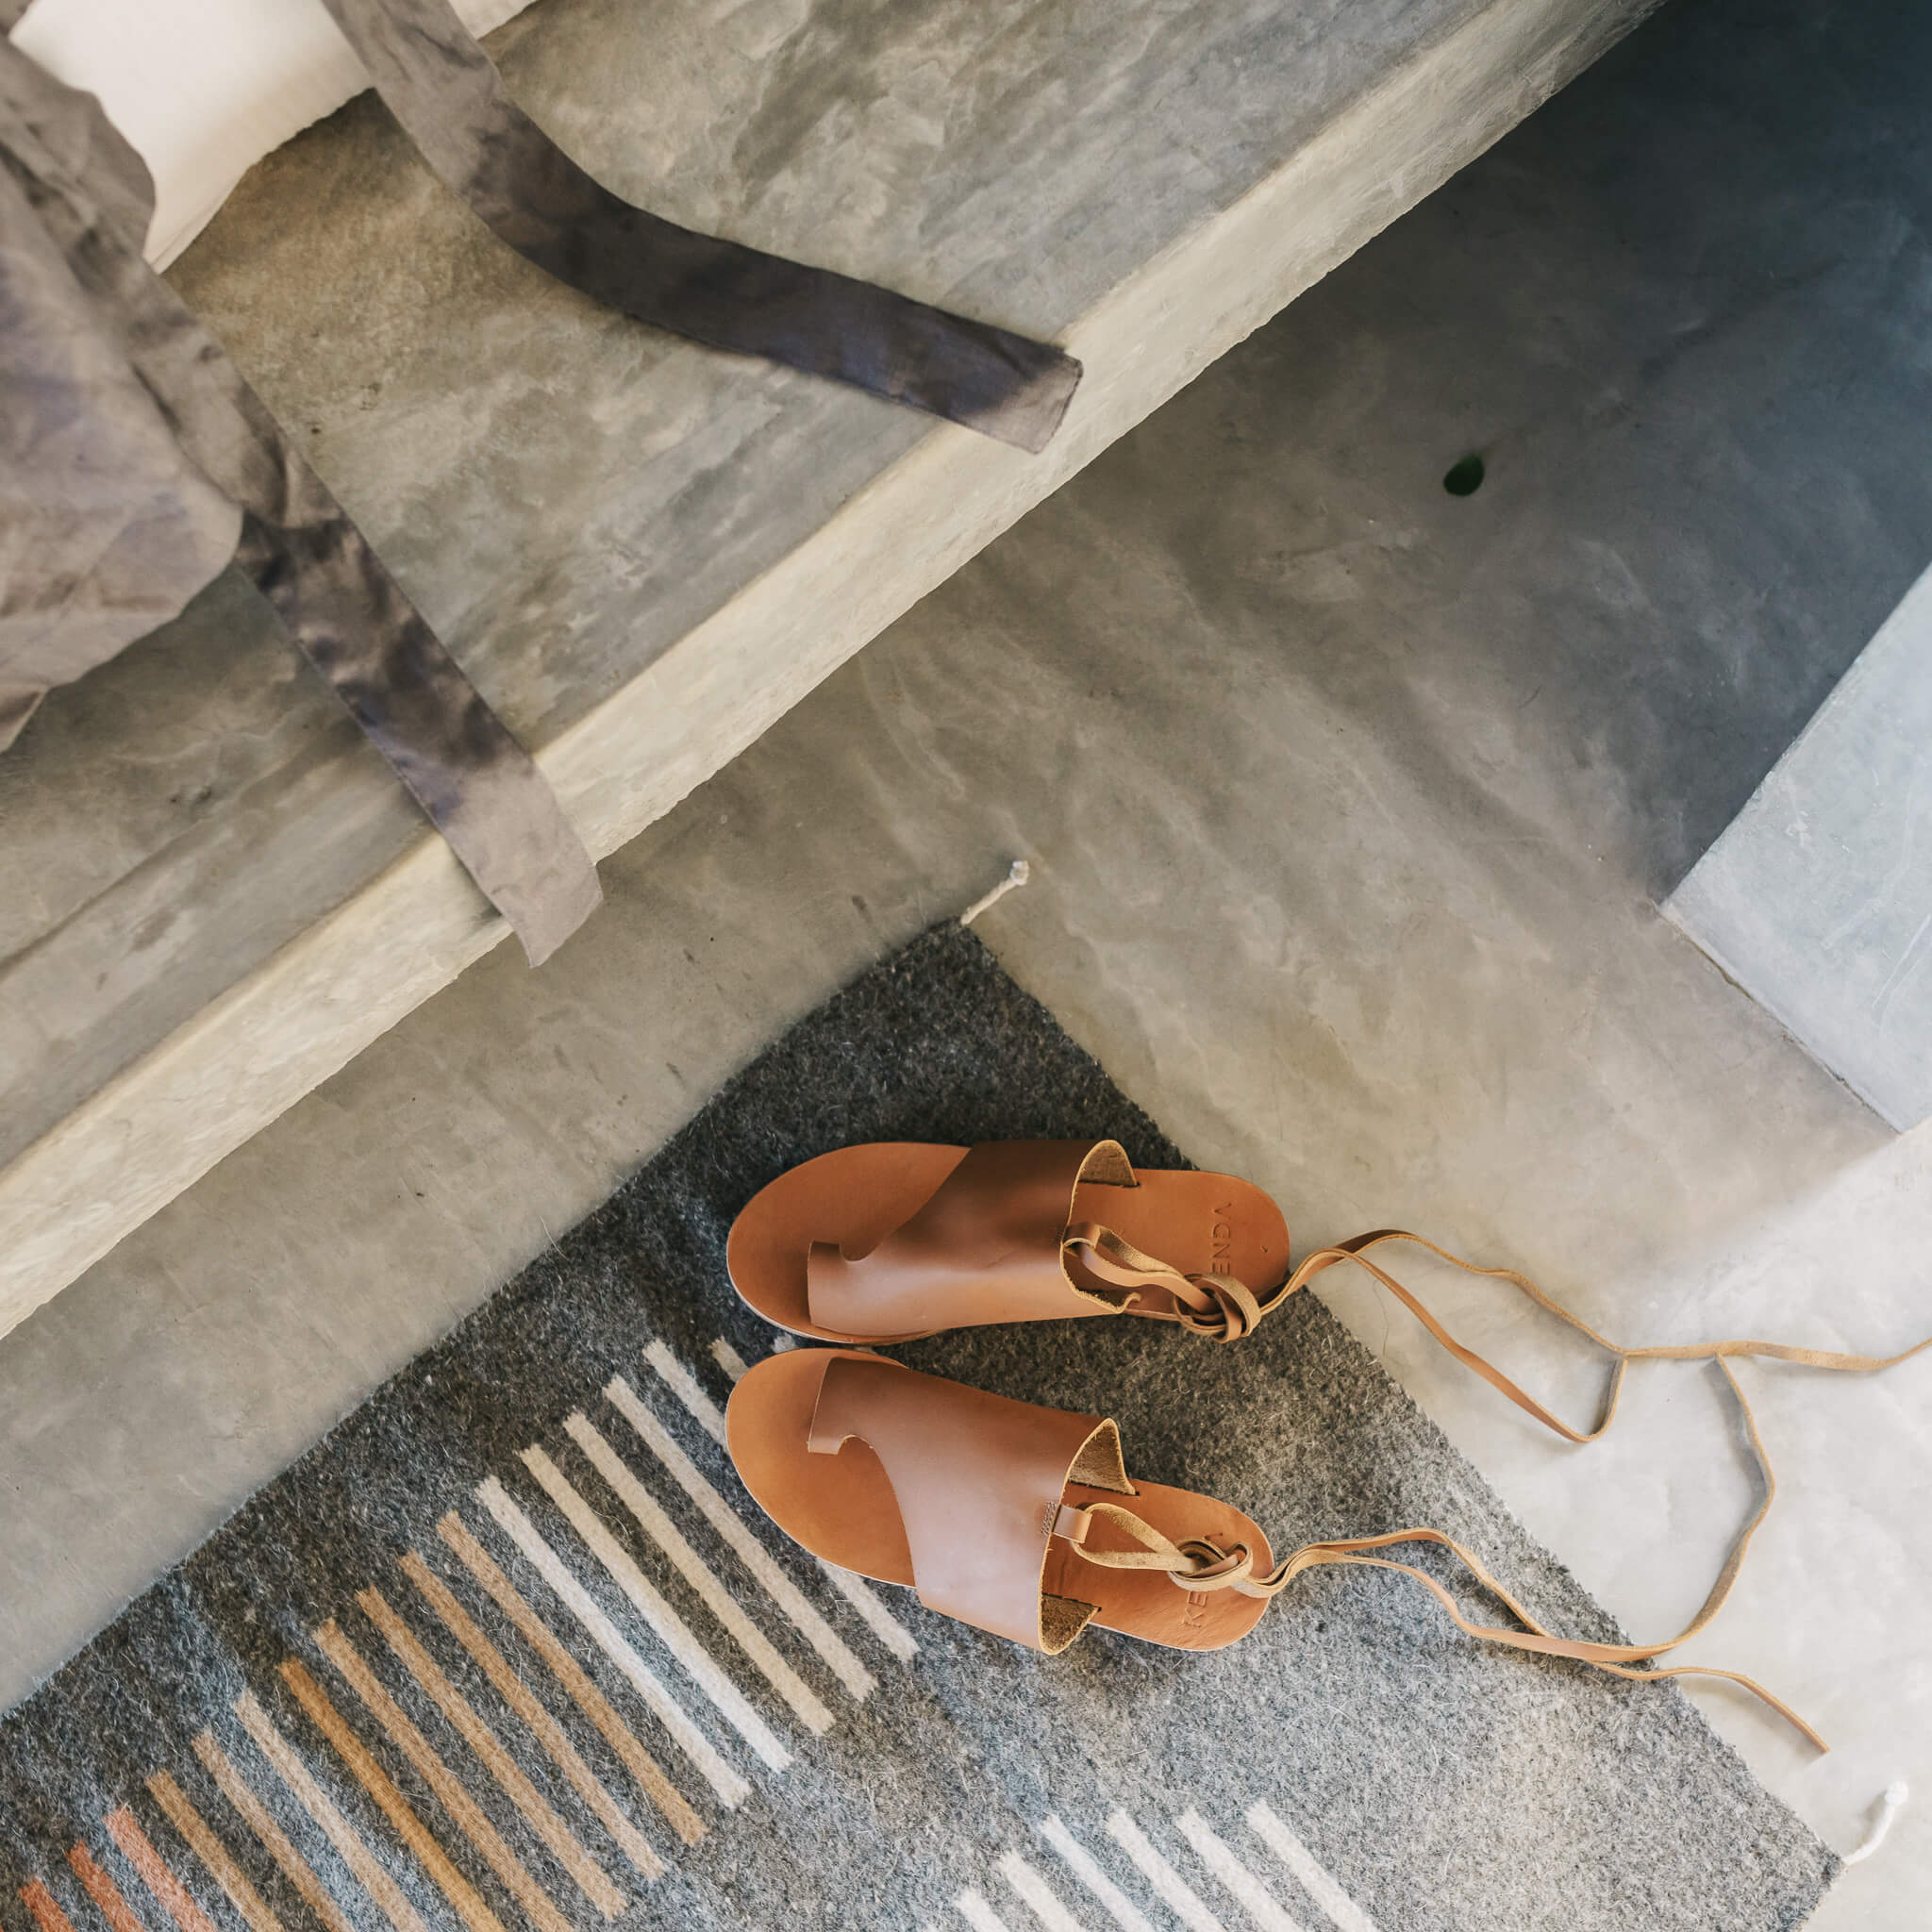 The details on a desierto wool rug featured with a pair of leather sandals.